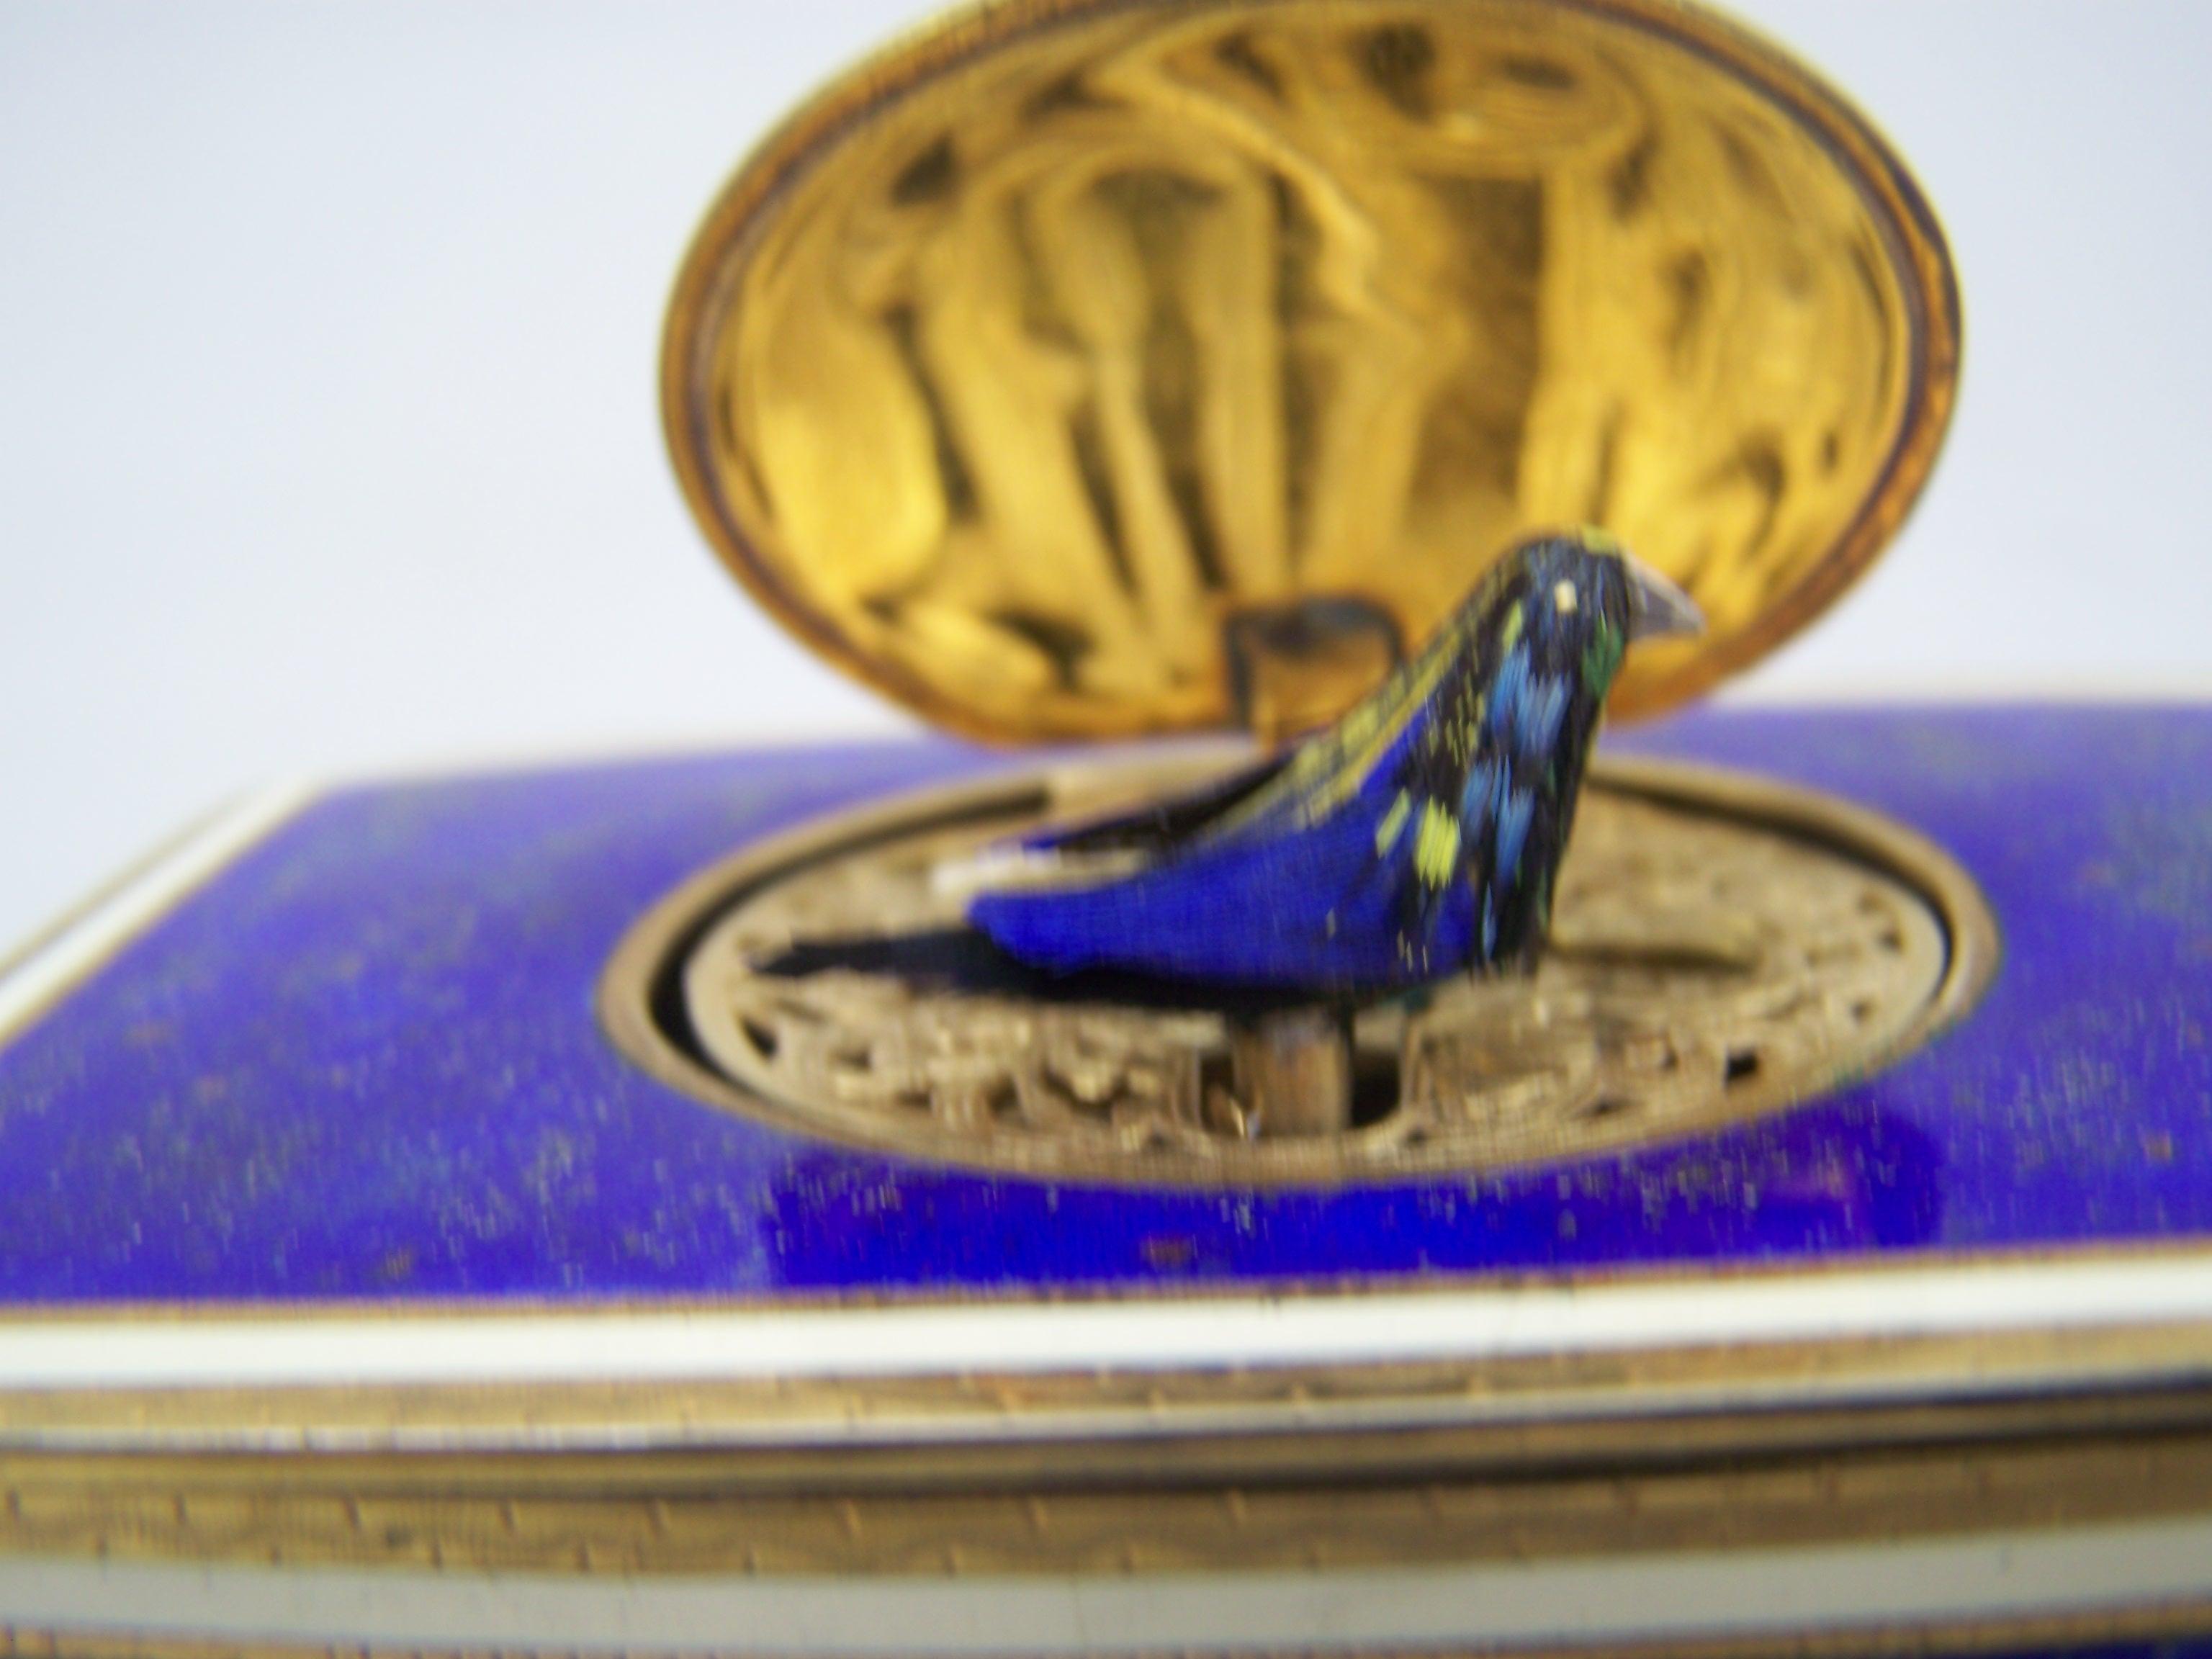 Singing bird box by K Griesbaum in guilded case and blue-goldflaked enamel 5